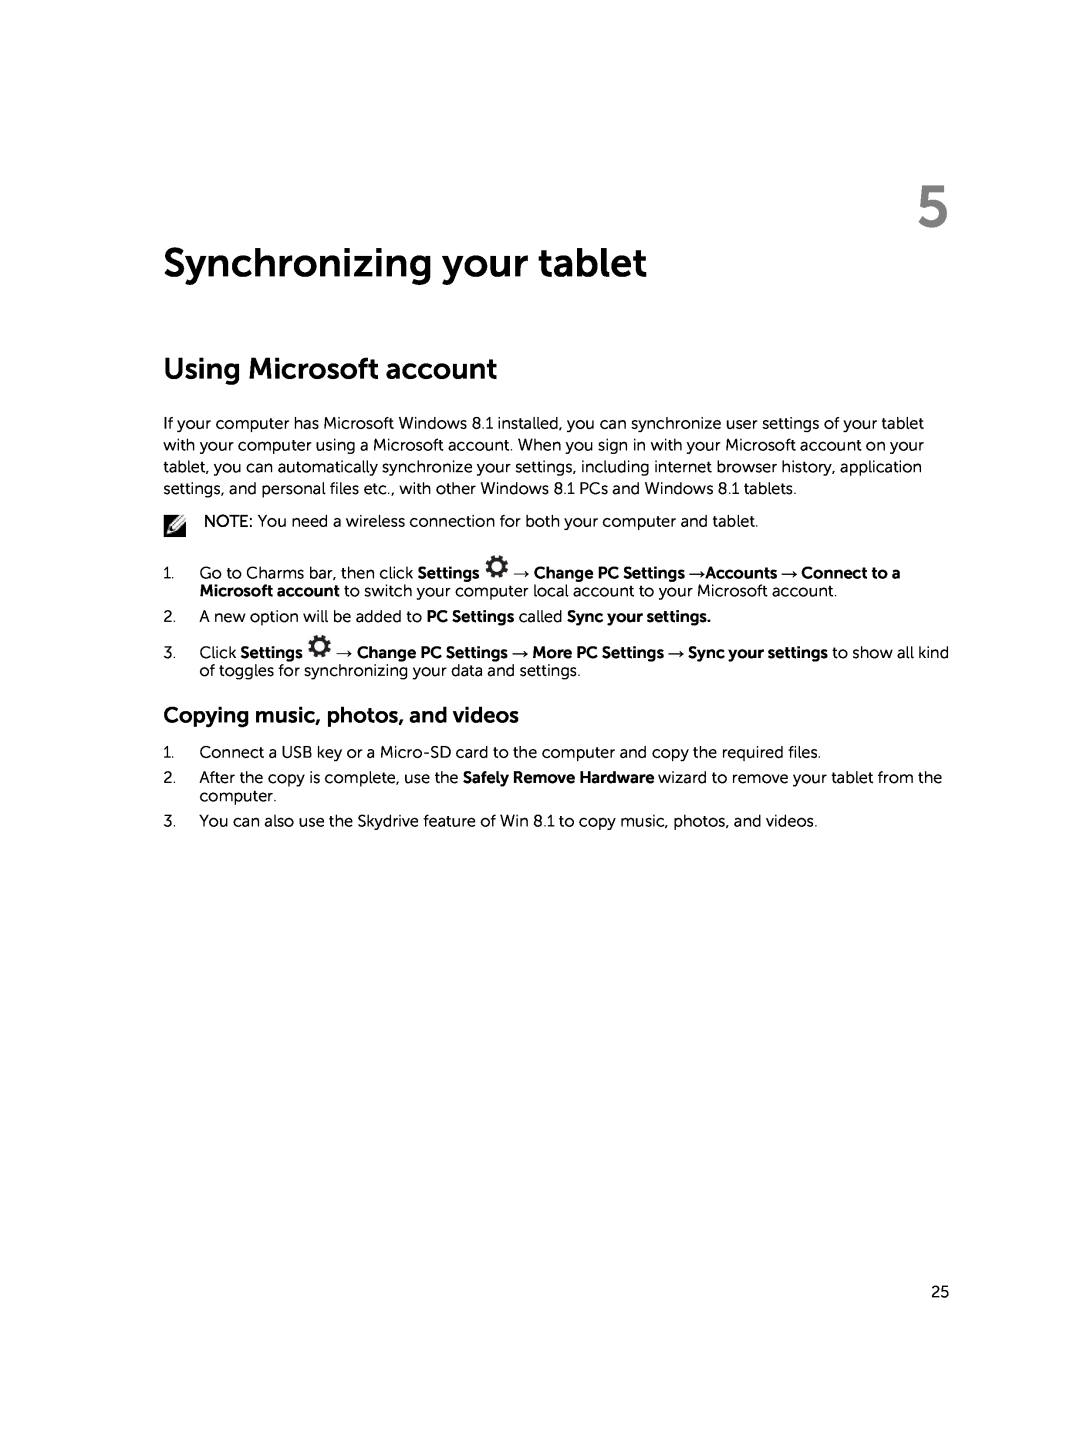 Dell T07G manual Synchronizing your tablet, Using Microsoft account 